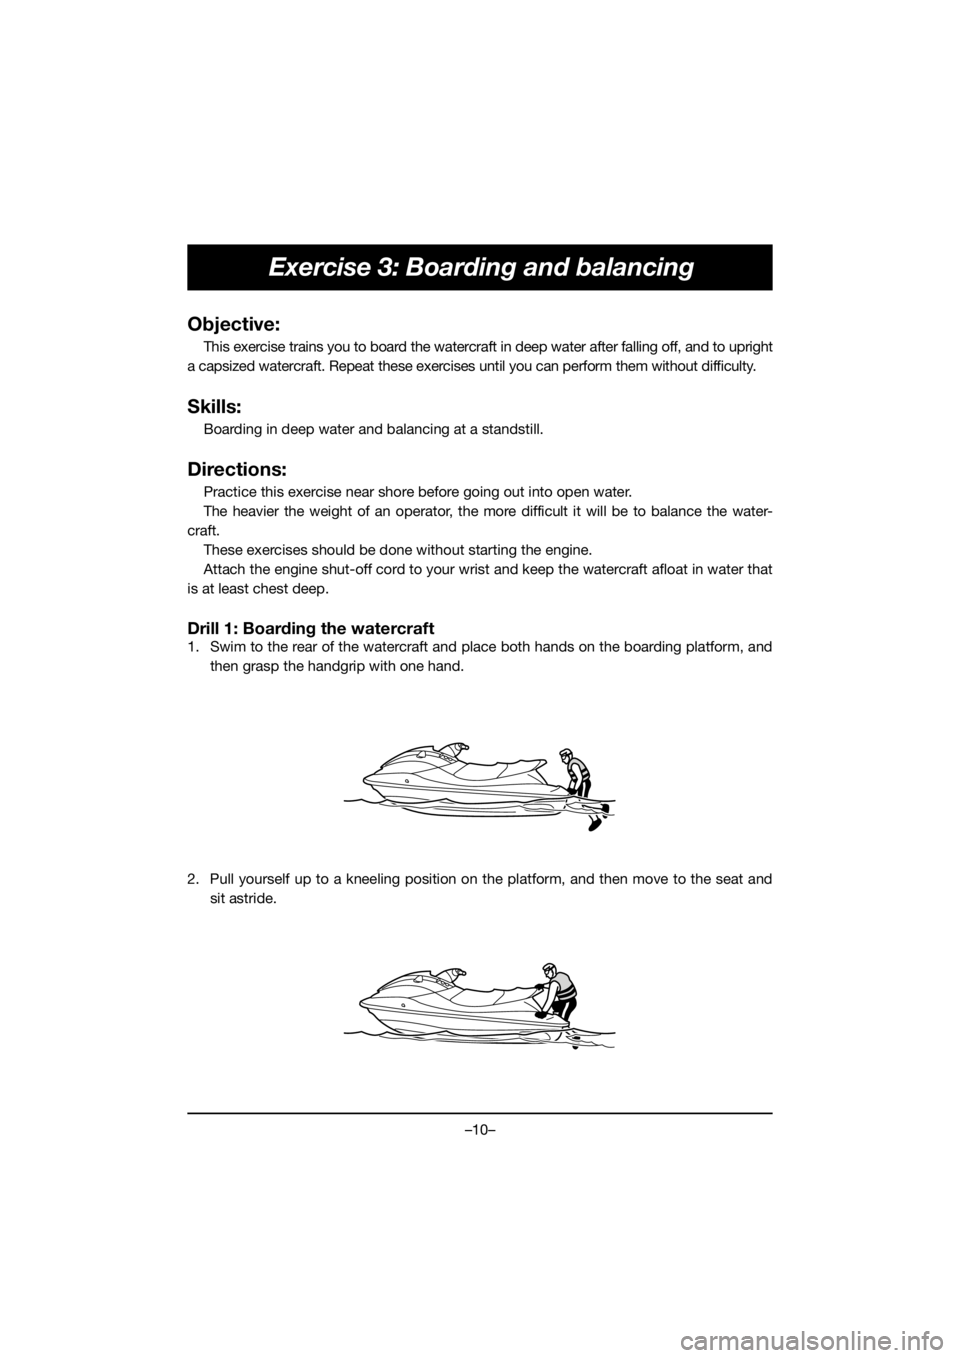 YAMAHA EX SPORT 2019  Manual de utilização (in Portuguese) –10–
Exercise 3: Boarding and balancing
Objective:
This exercise trains you to board the watercraft in deep water after falling off, and to upright
a capsized watercraft. Repeat these exercises un